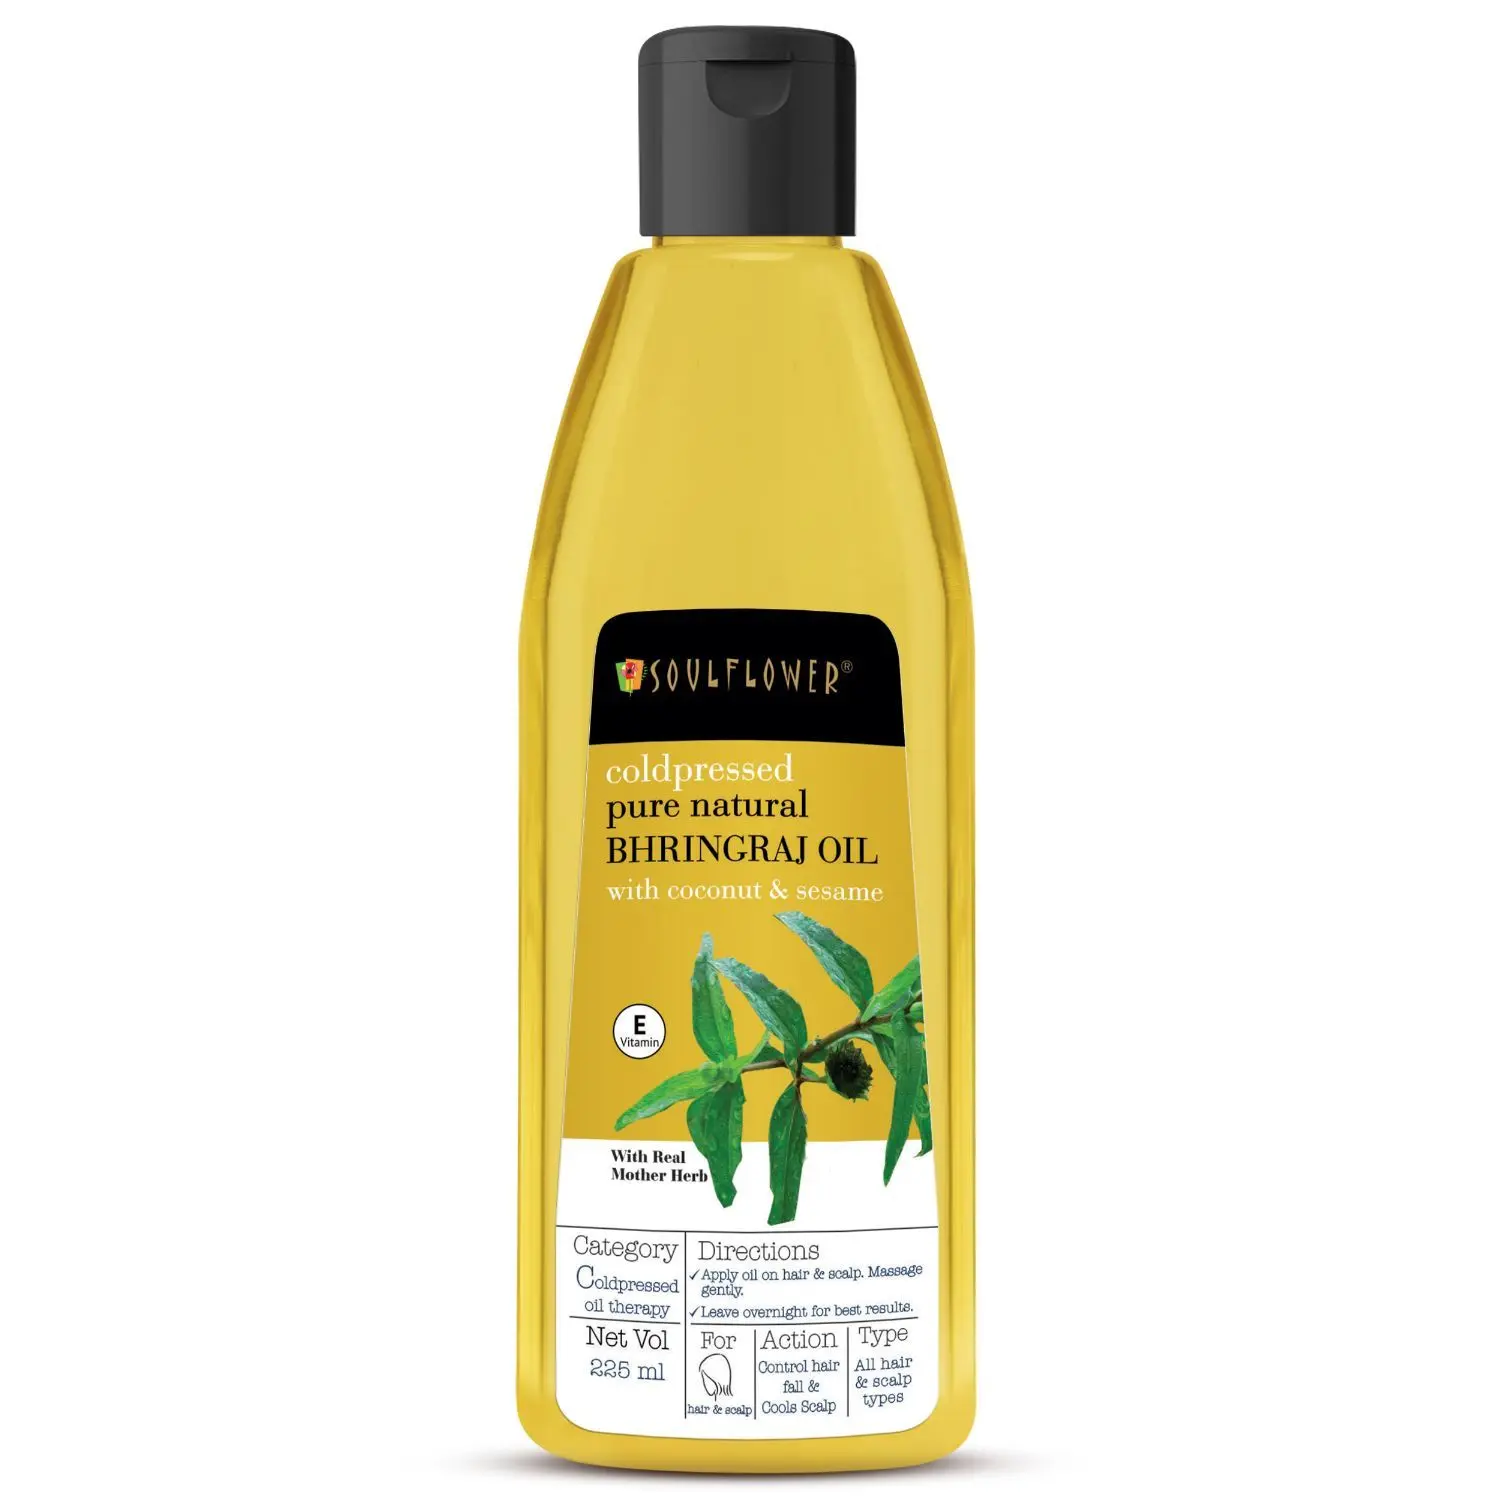 Soulflower Coldpressed Bhringraj Hair Oil With Coconut and Sesame for damaged, frizzy hair, premature greying, baldness & hair loss , 100% Pure and Natural, Herby, 225ml